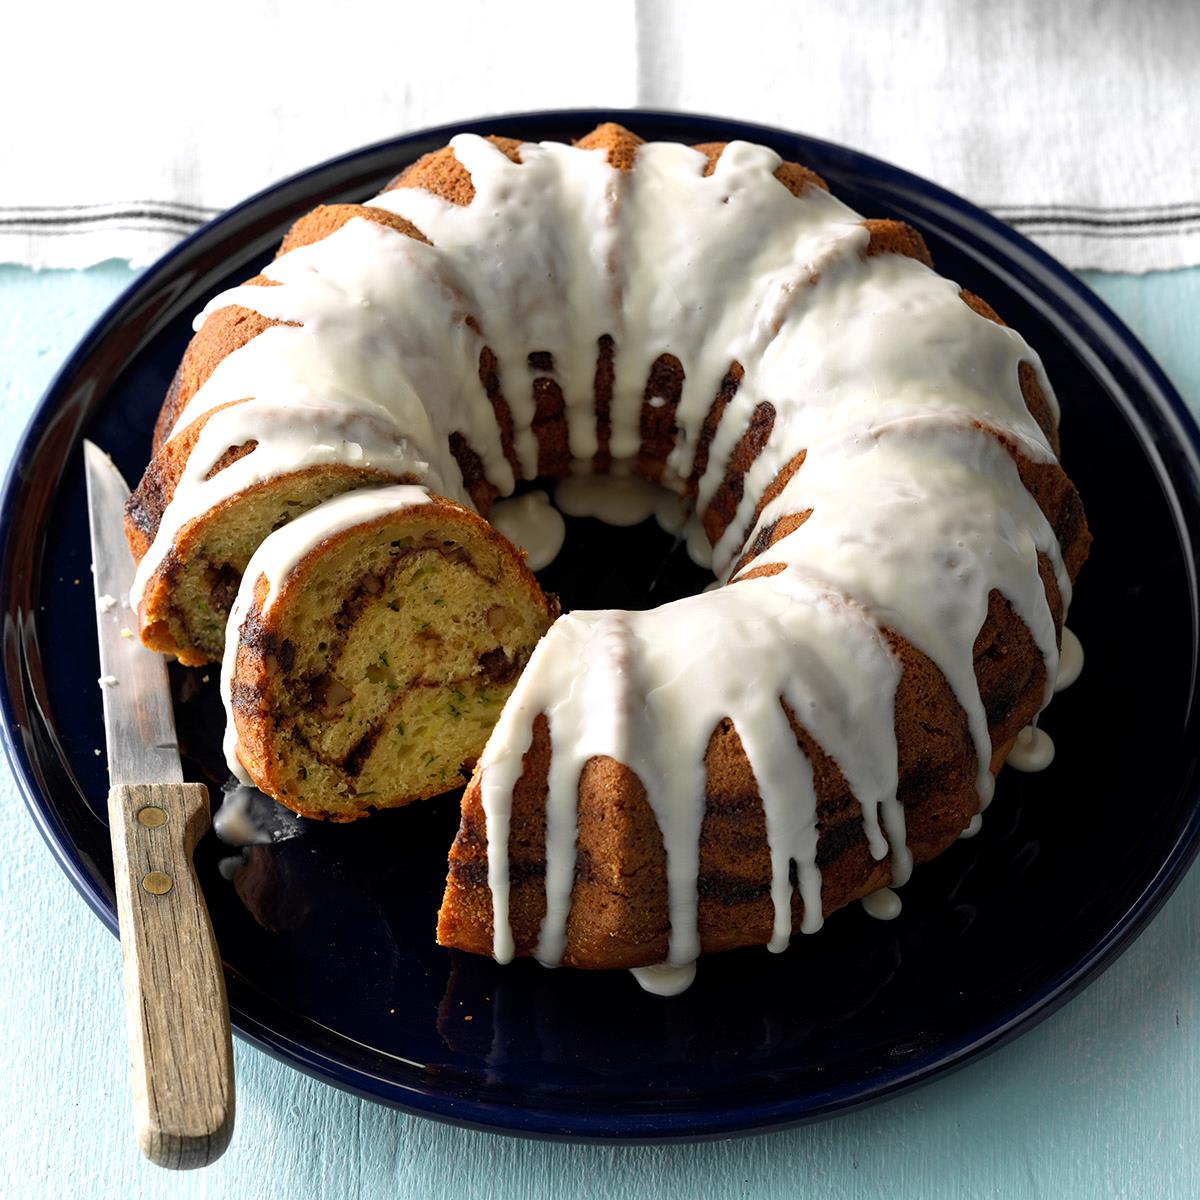 Download Streuseled Zucchini Bundt Cake Recipe How To Make It Taste Of Home